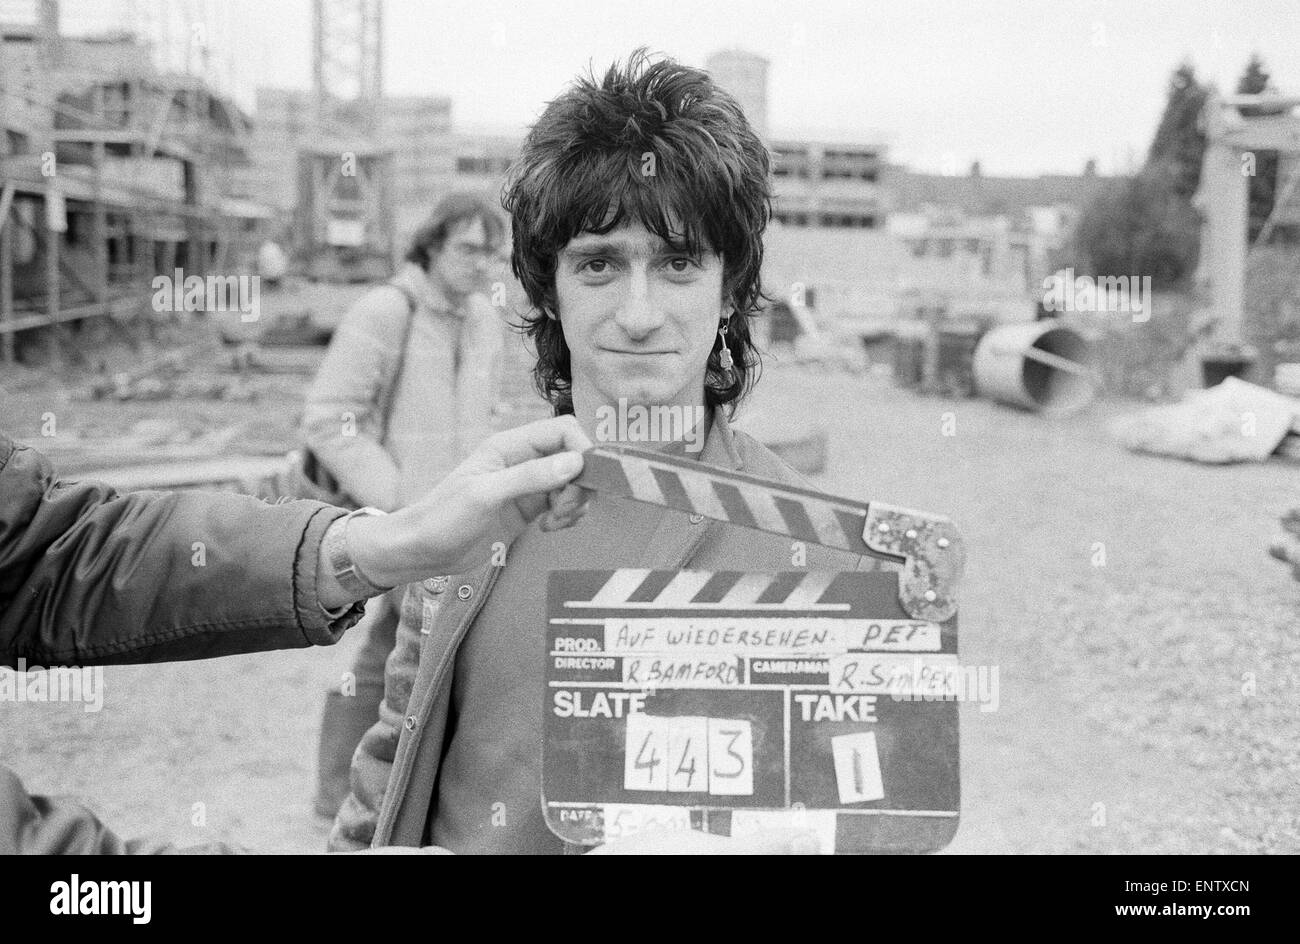 Gary Holton Actor Auf Wiedersehen Pet, television programme, being filmed at Central TV's Elstree Studios, October 1982. The comedy series is about a team of British bricklayers working in Germany. Pictured: actor Kevin Whately. Stock Photo